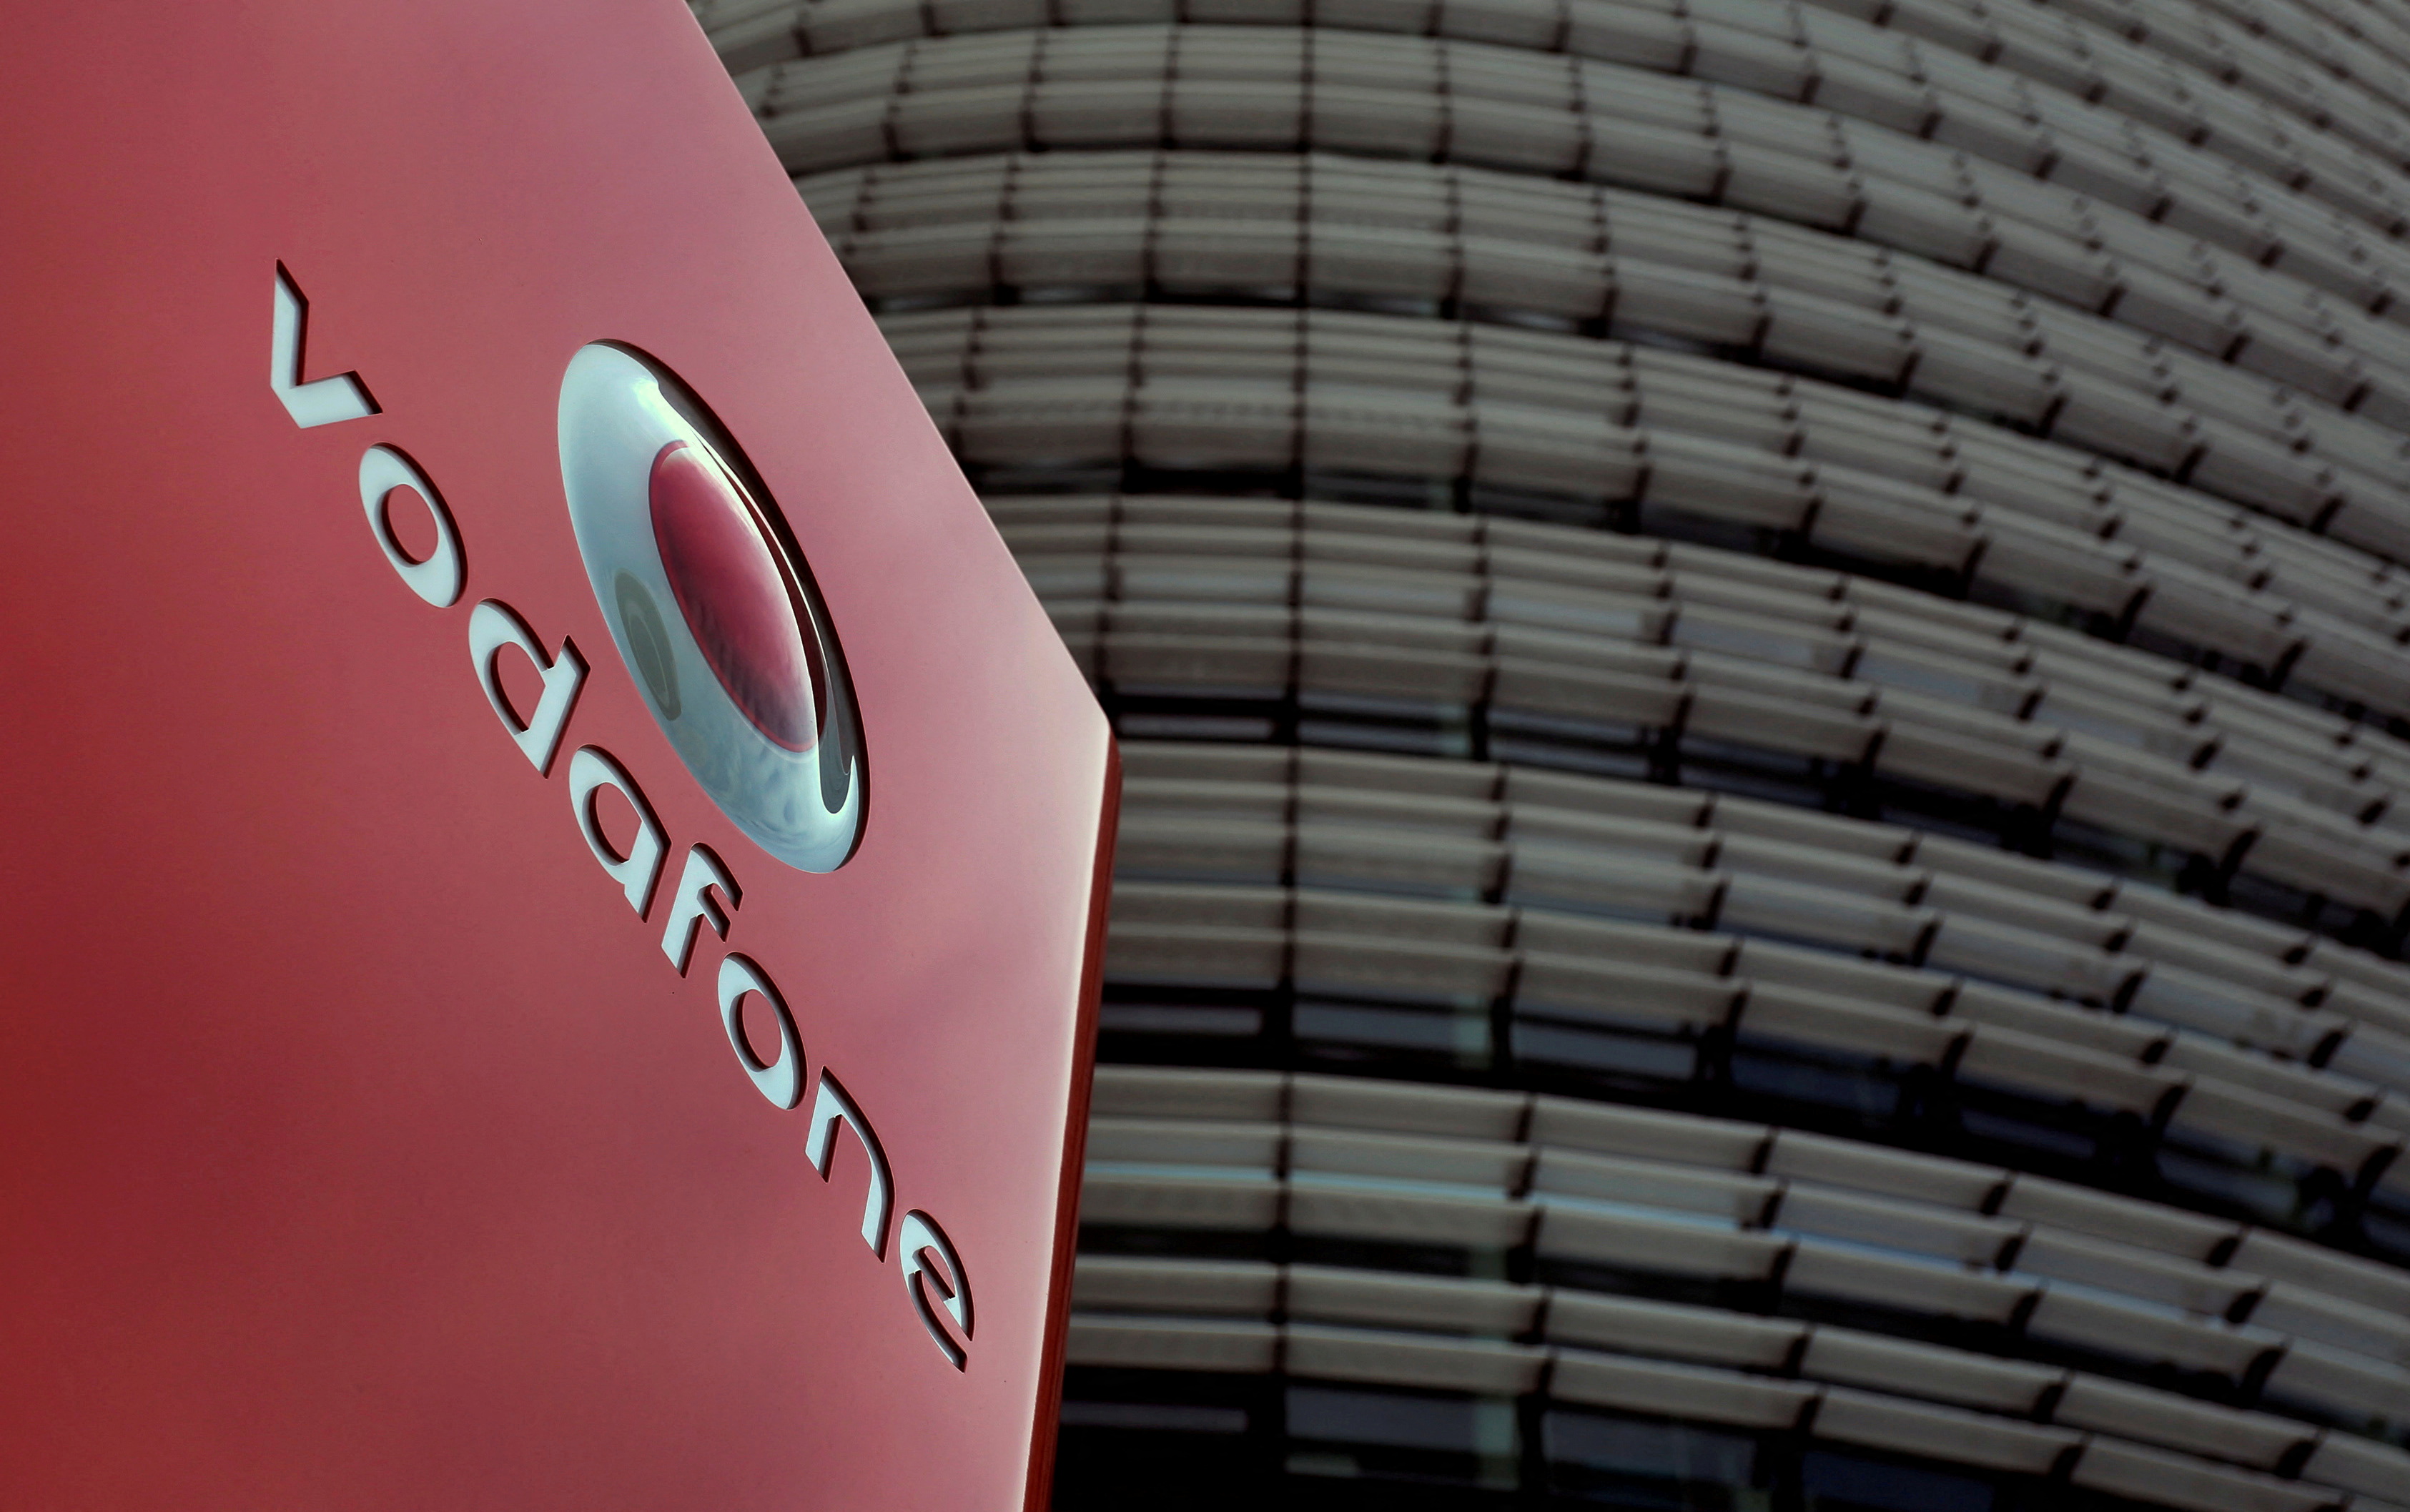 The headquarters of Vodafone Germany are pictured in Duesseldorf